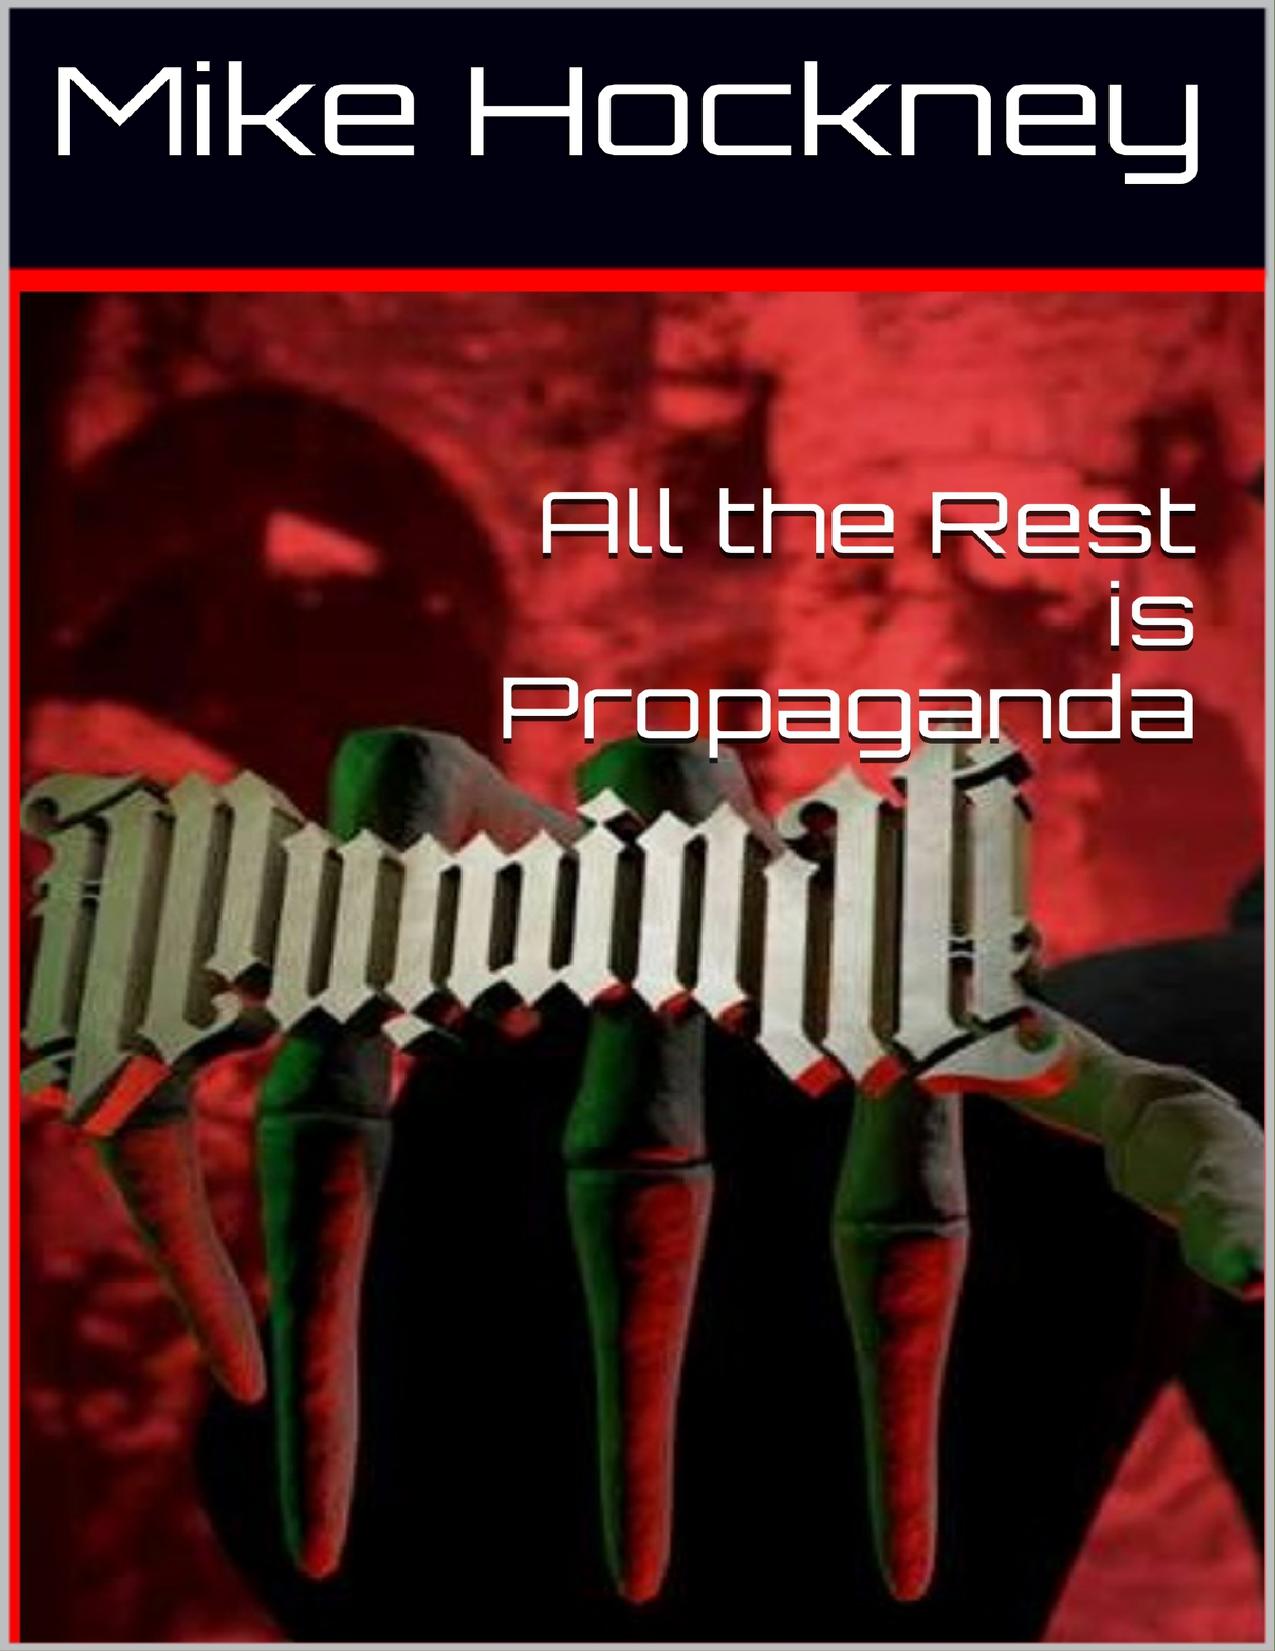 All the Rest is Propaganda (The God Series Book 12) by Mike Hockney